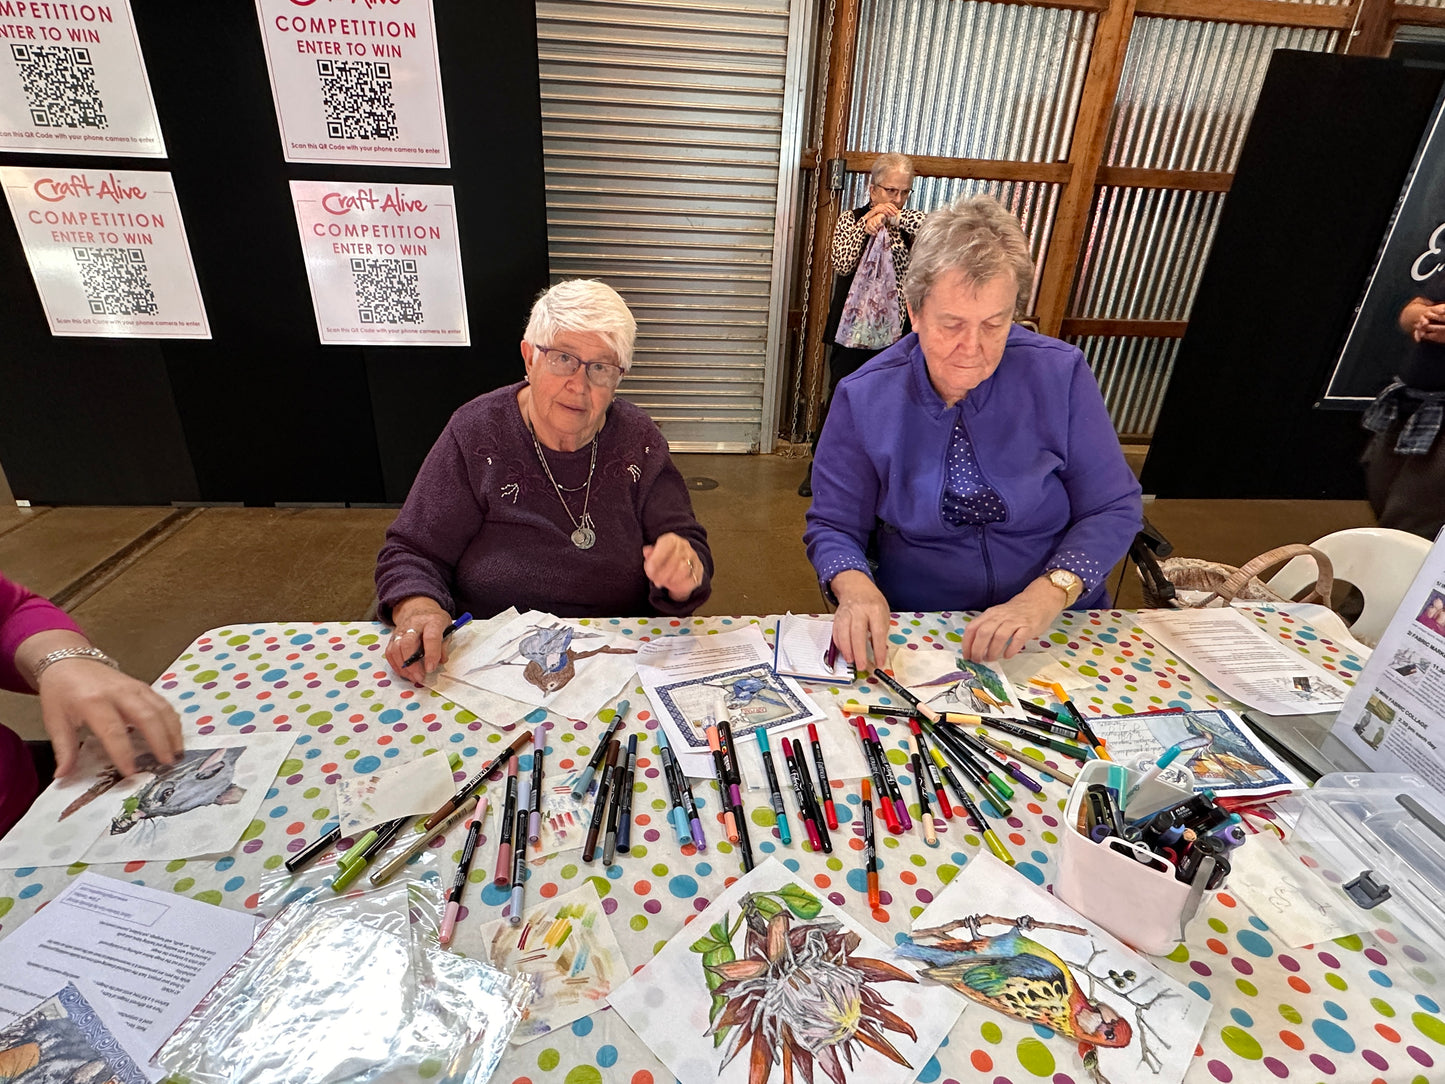 happy makers  at Craft alive toowomba 2 sew texiles art quilt supplies